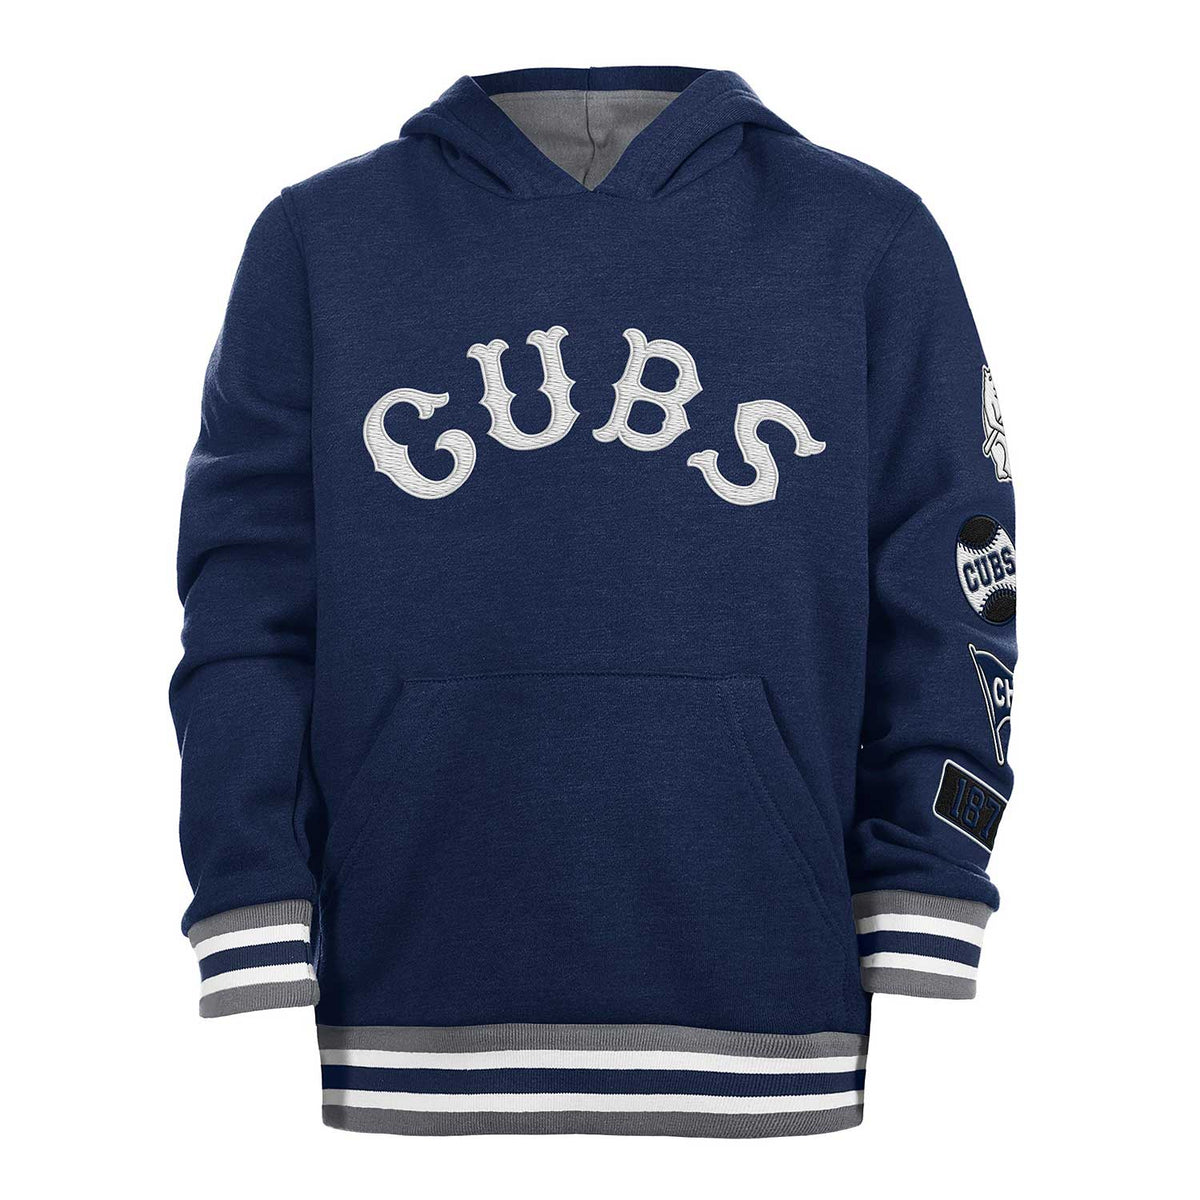 Retro Chicago Cubs Hoodie - Featuring Crested Graphics - Men's Extra Large